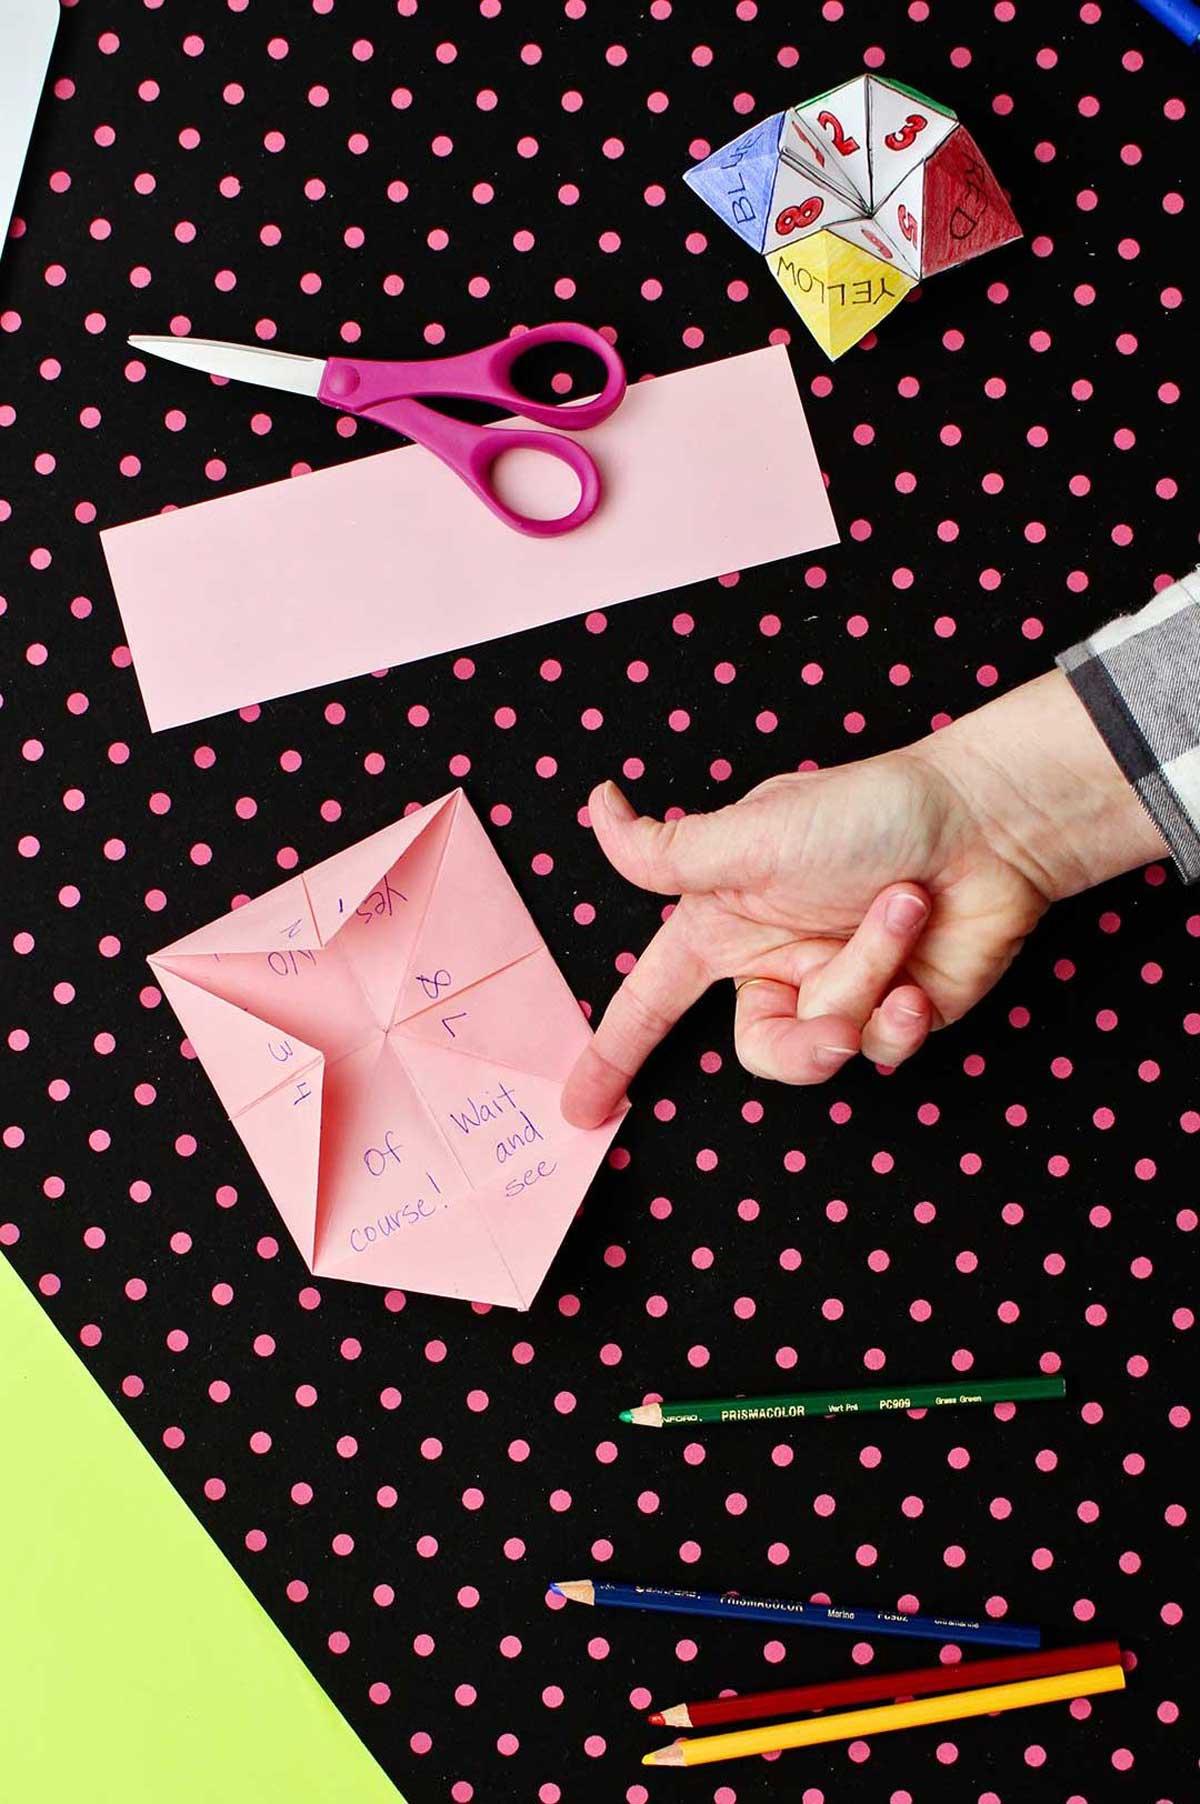 Inside flaps of the pink paper fortune teller stating fortunes with scissors and colored pencils laying on a black and pink polka dotted background.